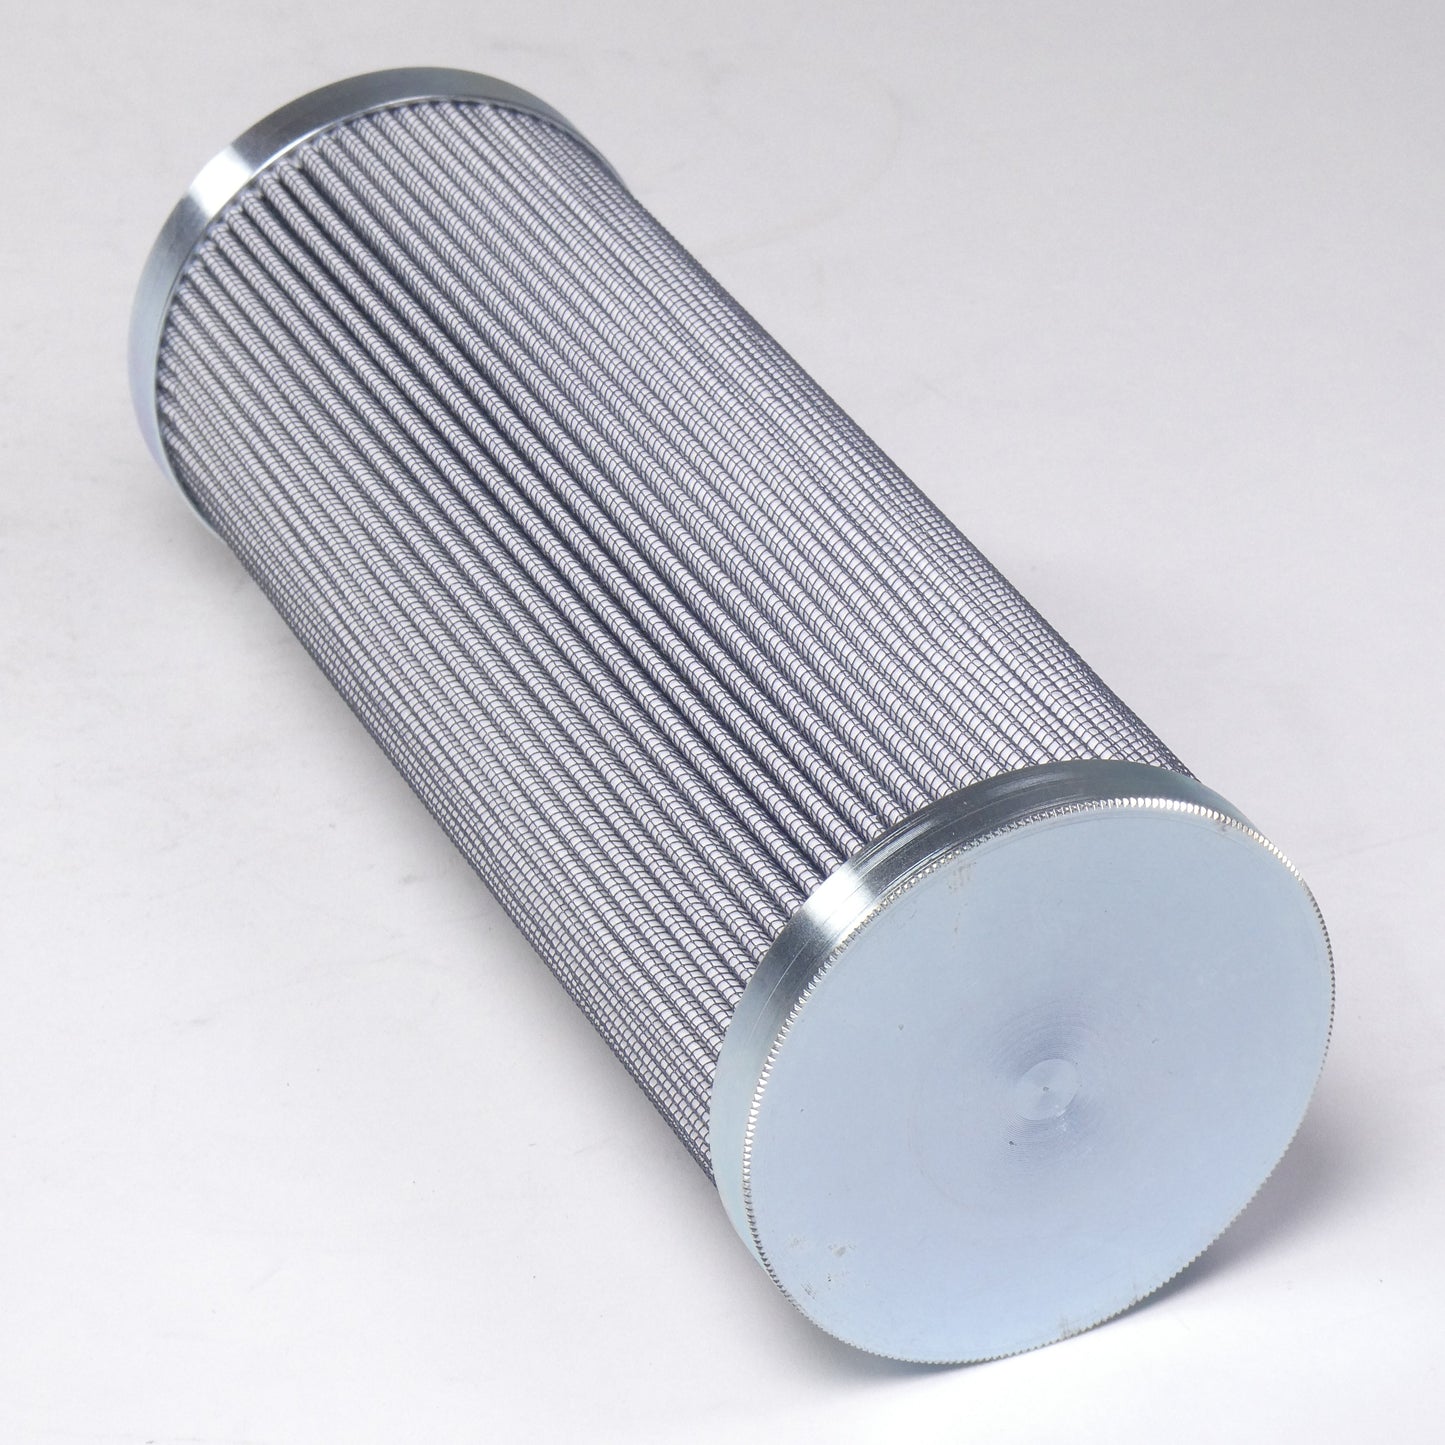 Hydrafil Replacement Filter Element for Filtersoft M69608MABH